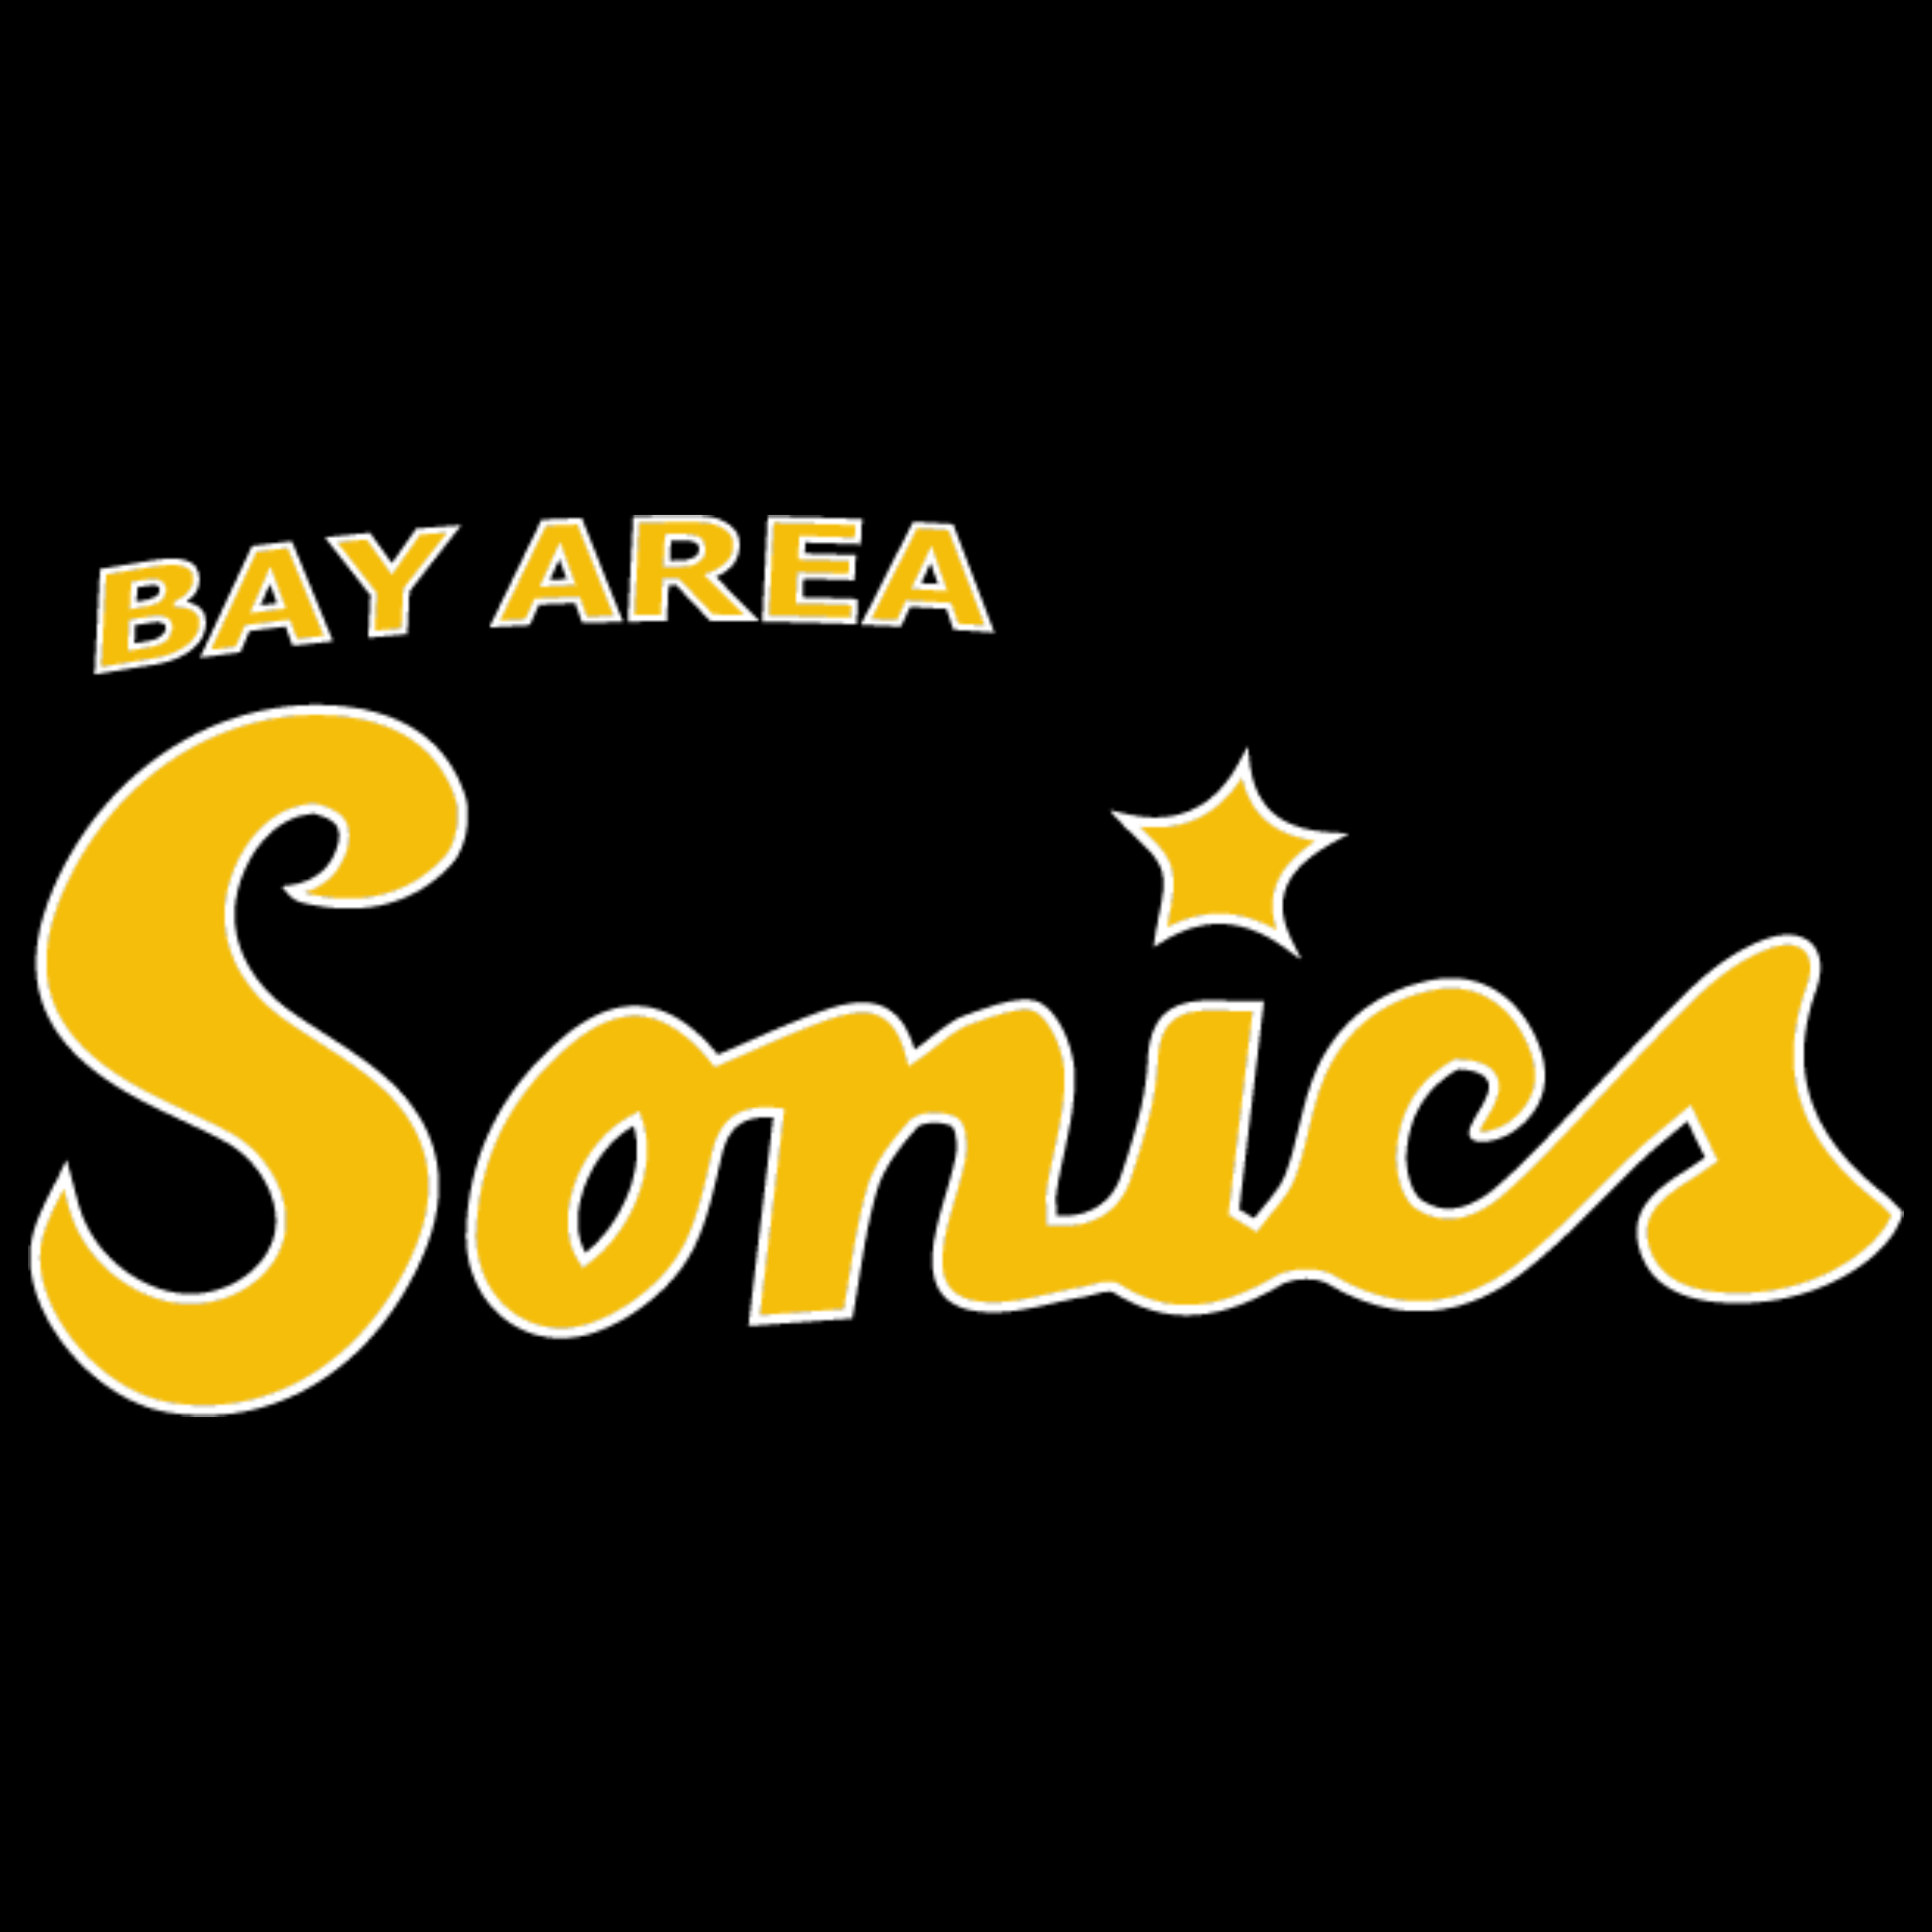 The official logo of Bay Area Sonics